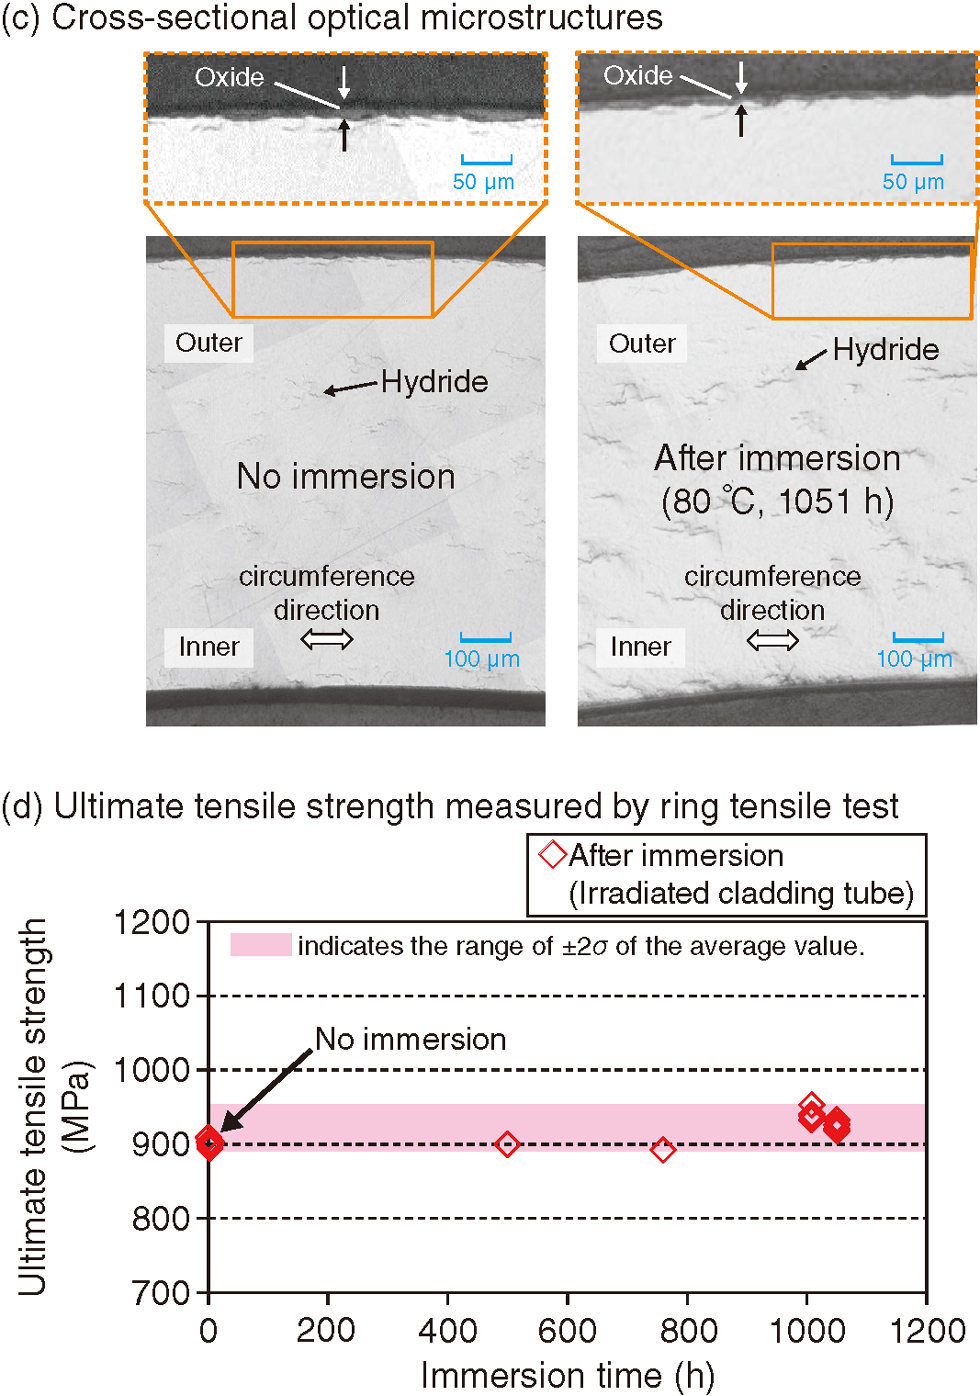 Fig.1-26 Optical microstructures and tensile properties of the cladding tubes without immersion and after seawater immersion